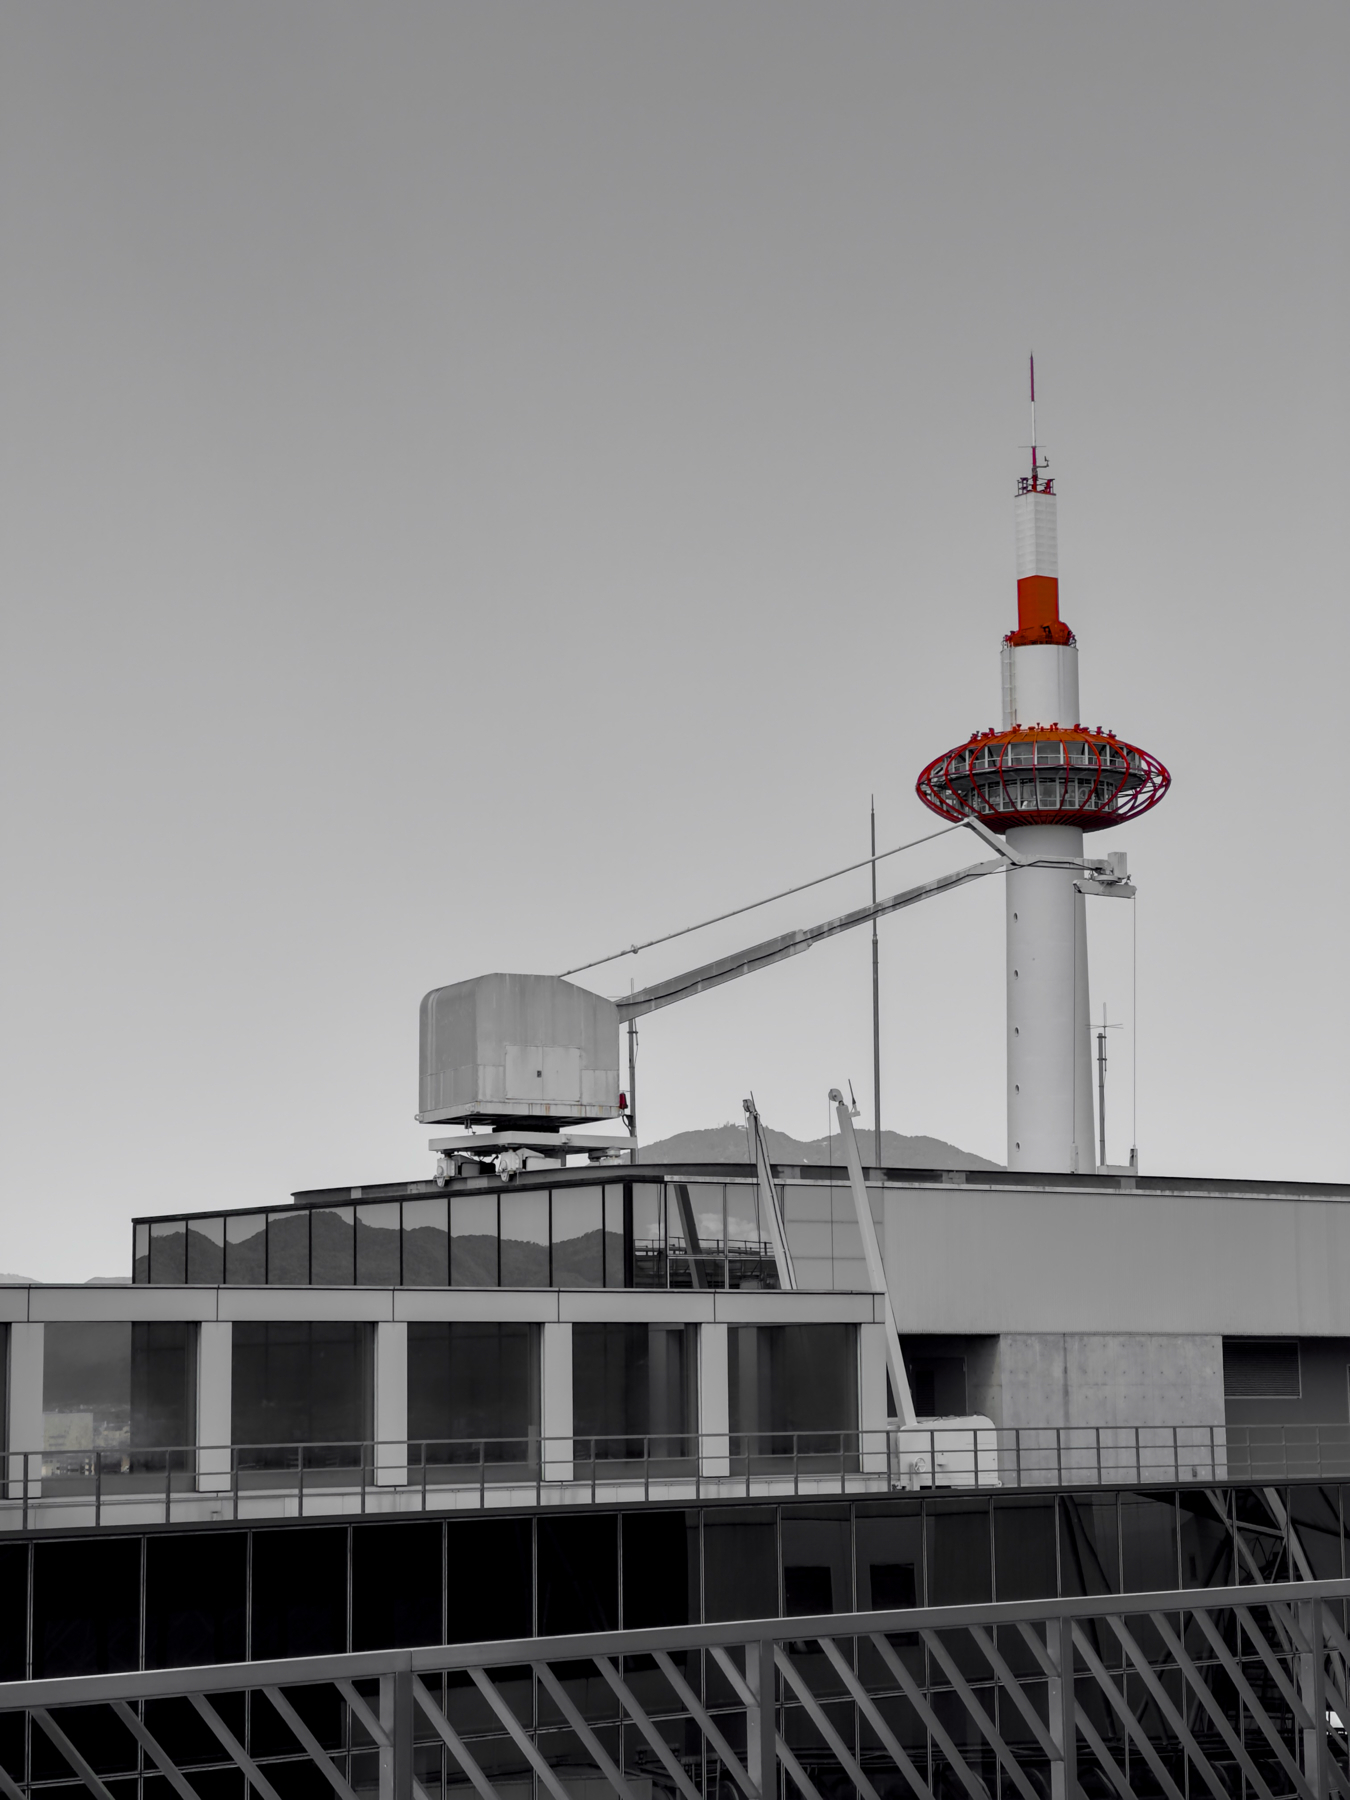 A black and white image featuring a Kyoto Tower in the background with geometric structures in the foreground. Red has been selectively kept in the image